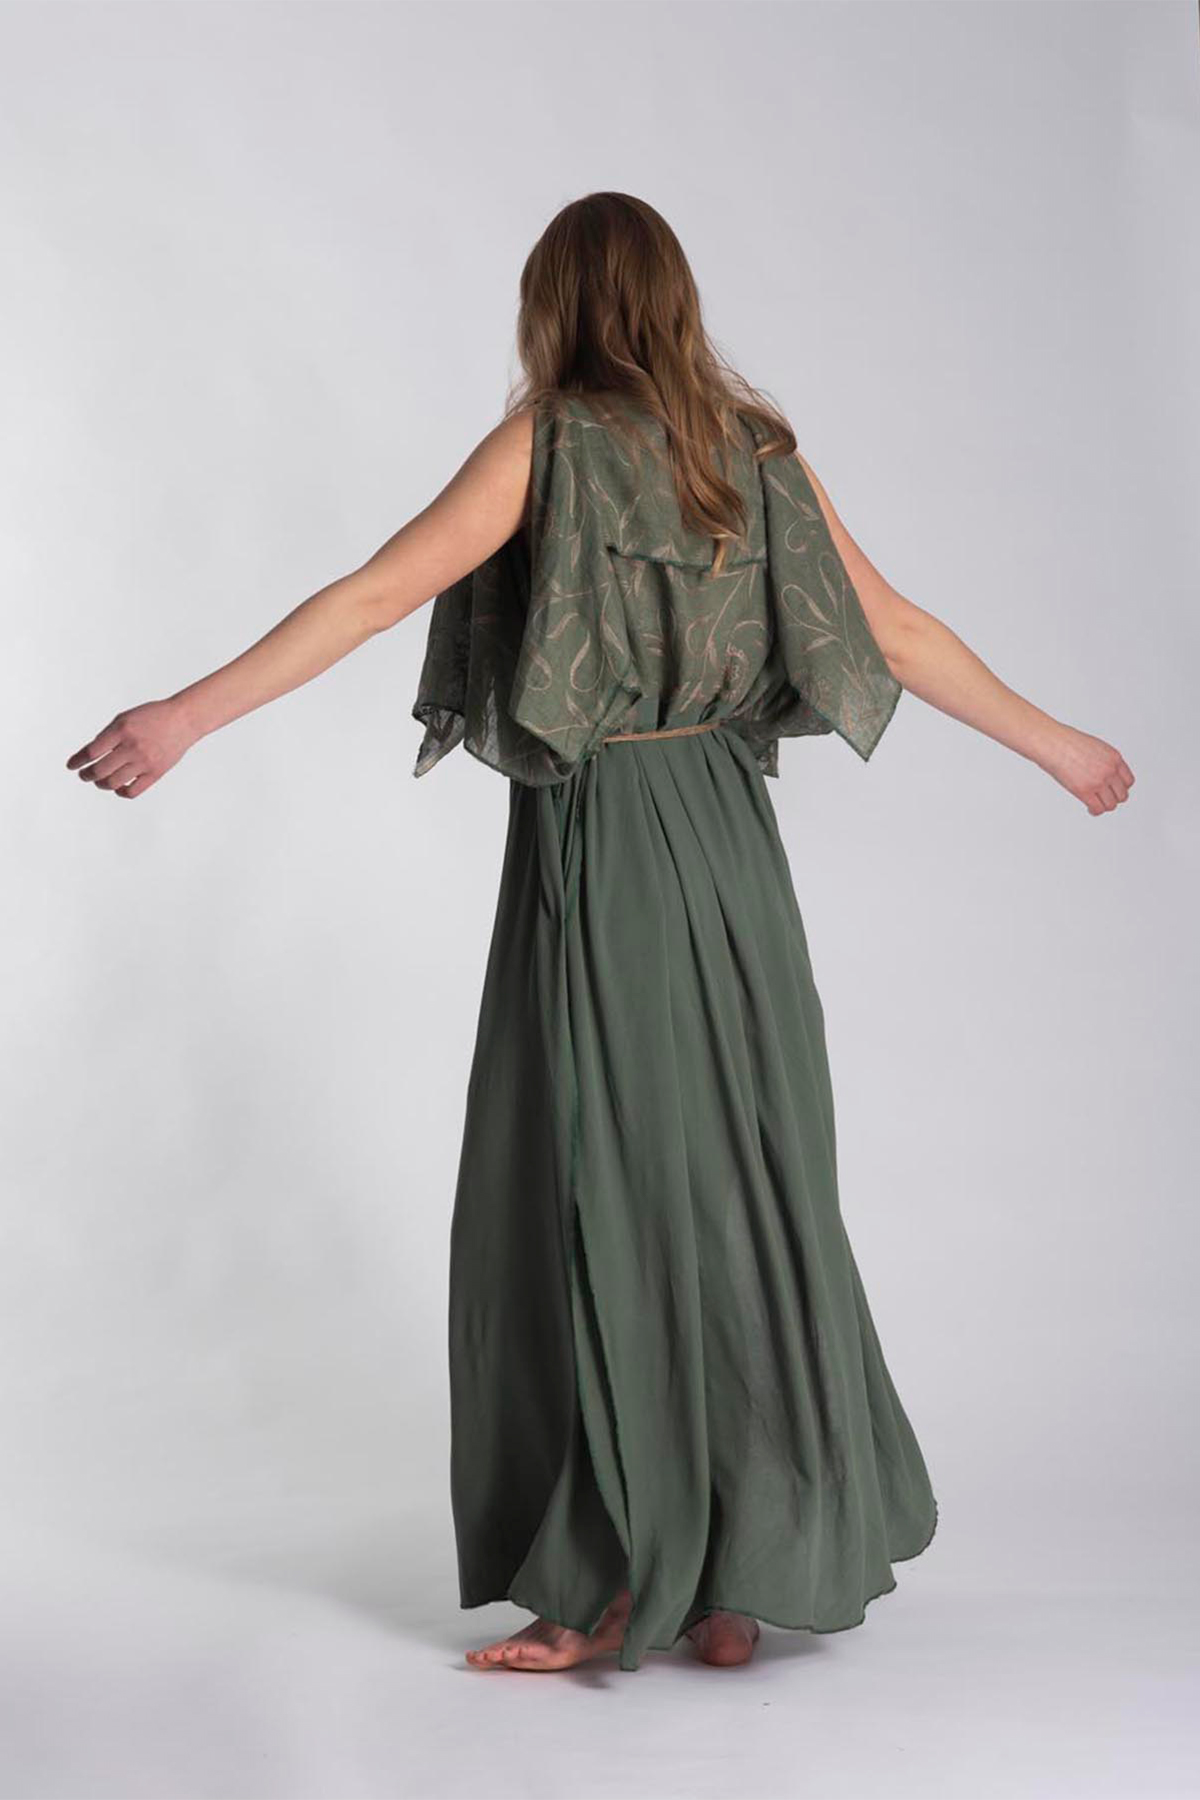 Greek inspired green dress with linen top and rayon blend bottom